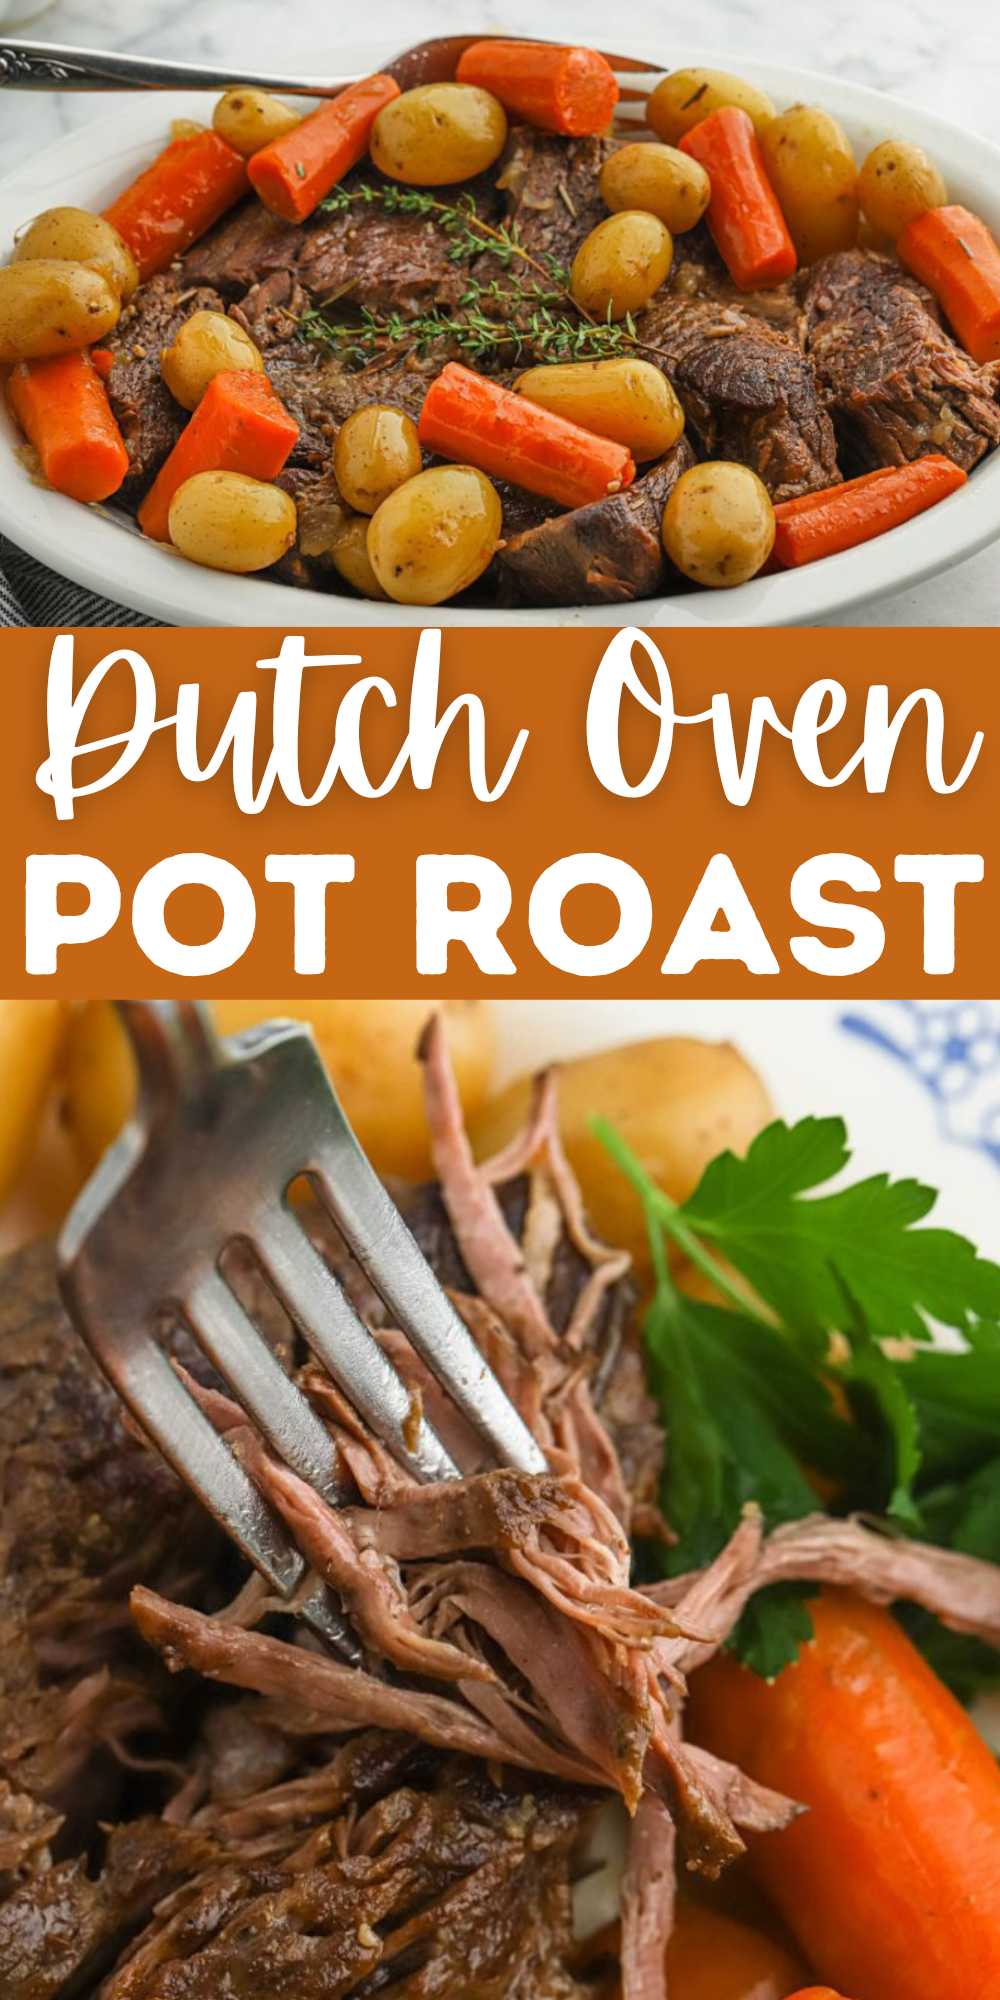 If you are looking for the best pot roast recipe, make Dutch Oven Pot Roast. Cooking it in the Dutch oven makes the roast fall-apart tender. The pot roast, veggies, fresh herbs and gravy make the best weekend meal. This recipe taste amazing also serving with a side of dinner rolls. #eatingonadime #dutchovenpotroast #potroastrecipe